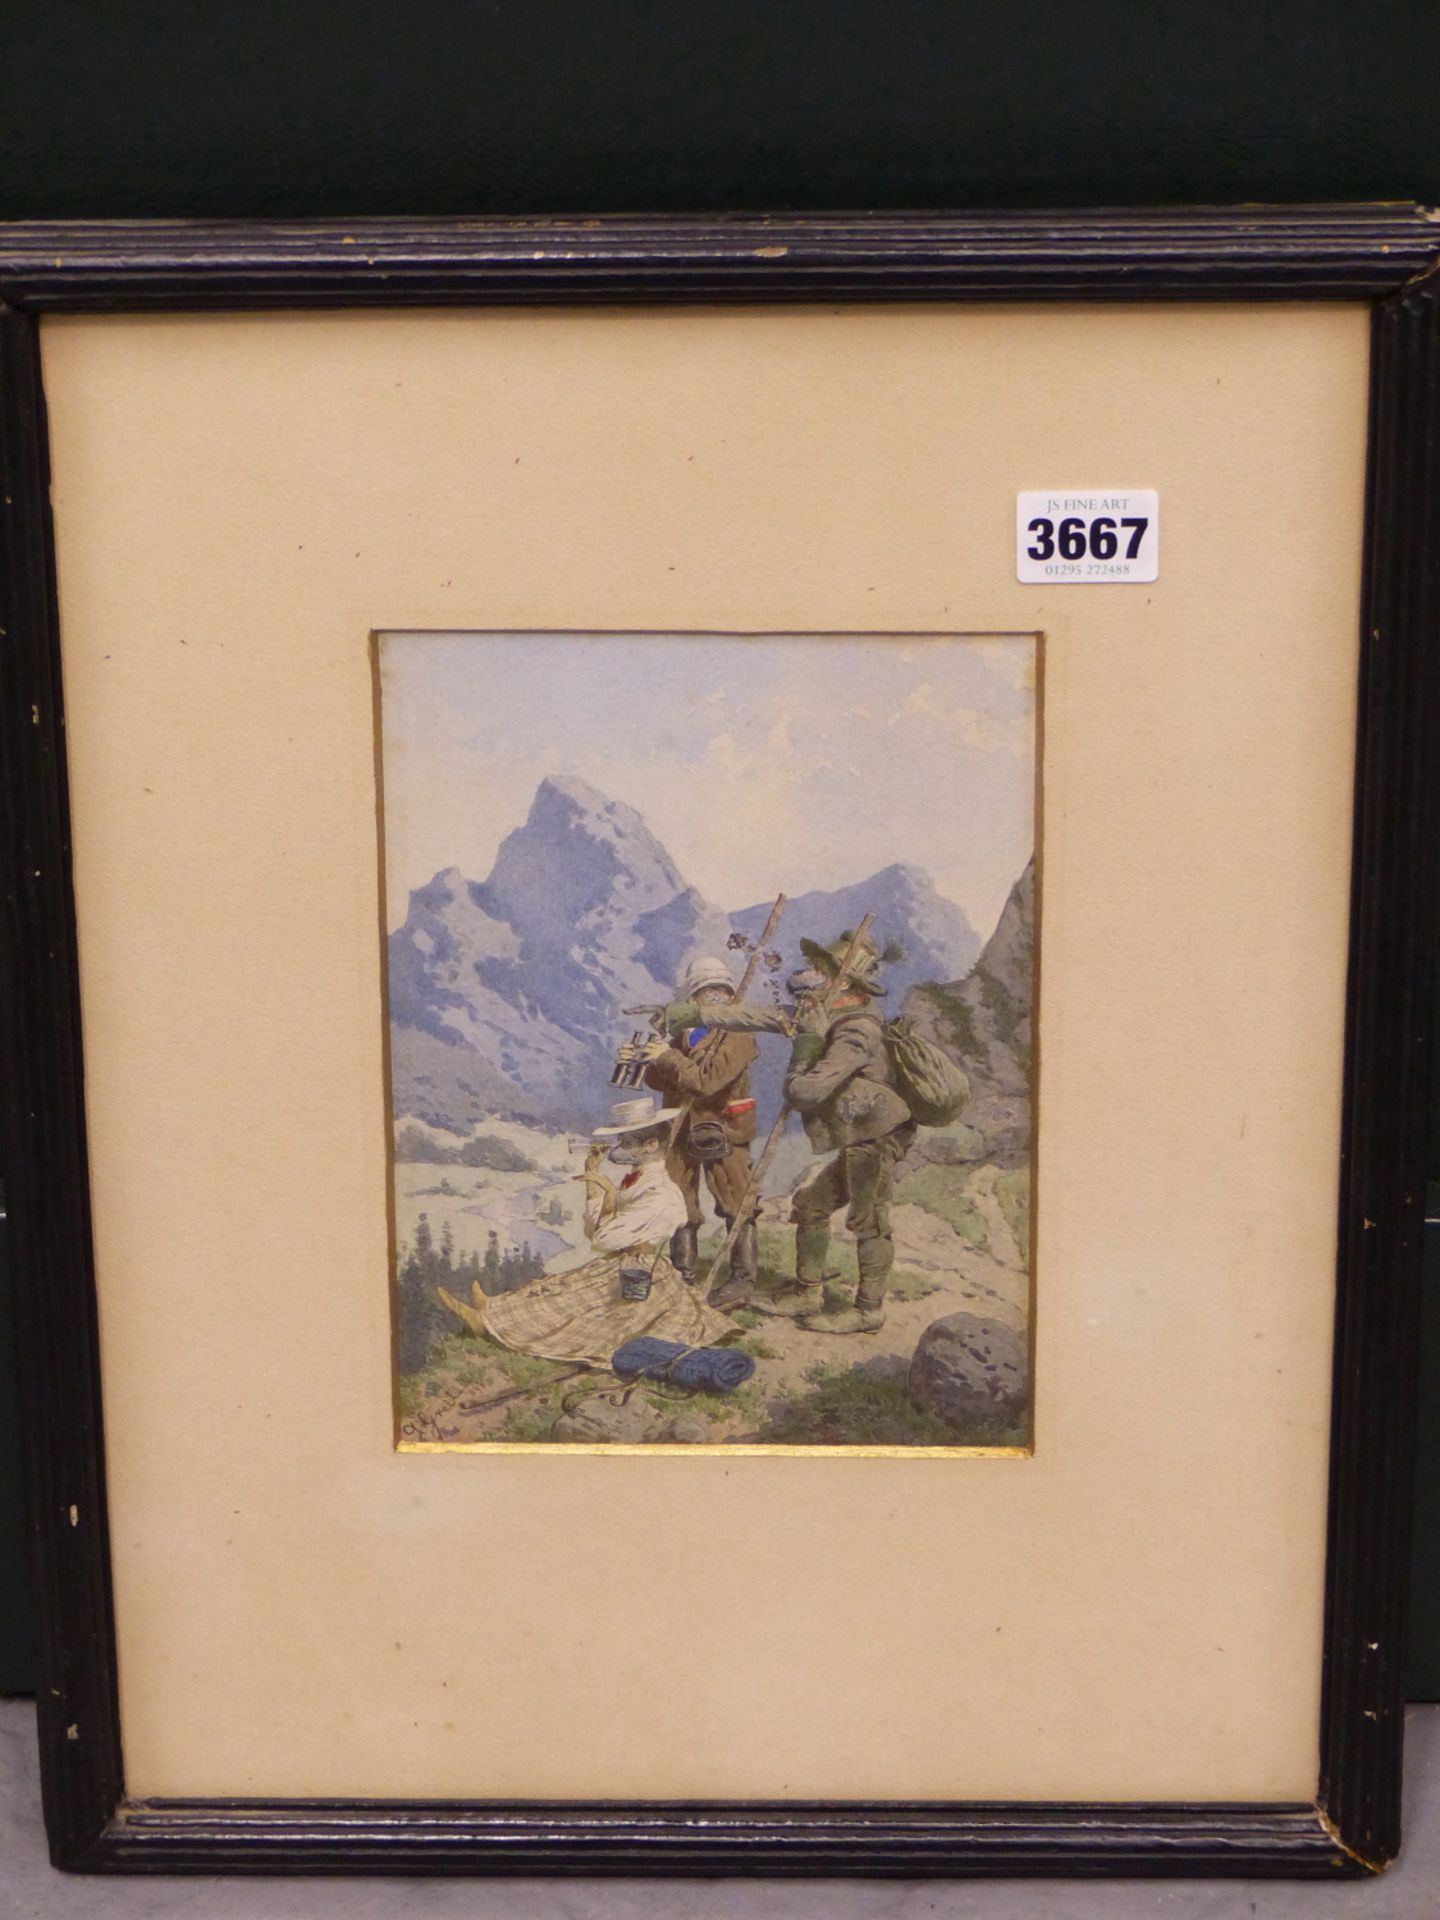 ALOIS GREIL (1842-1902), THREE ANTHROPOMORPHIC CLIMBERS IN THE AUSTRIAN ALPS. WATERCOLOUR, SIGNED - Image 3 of 8